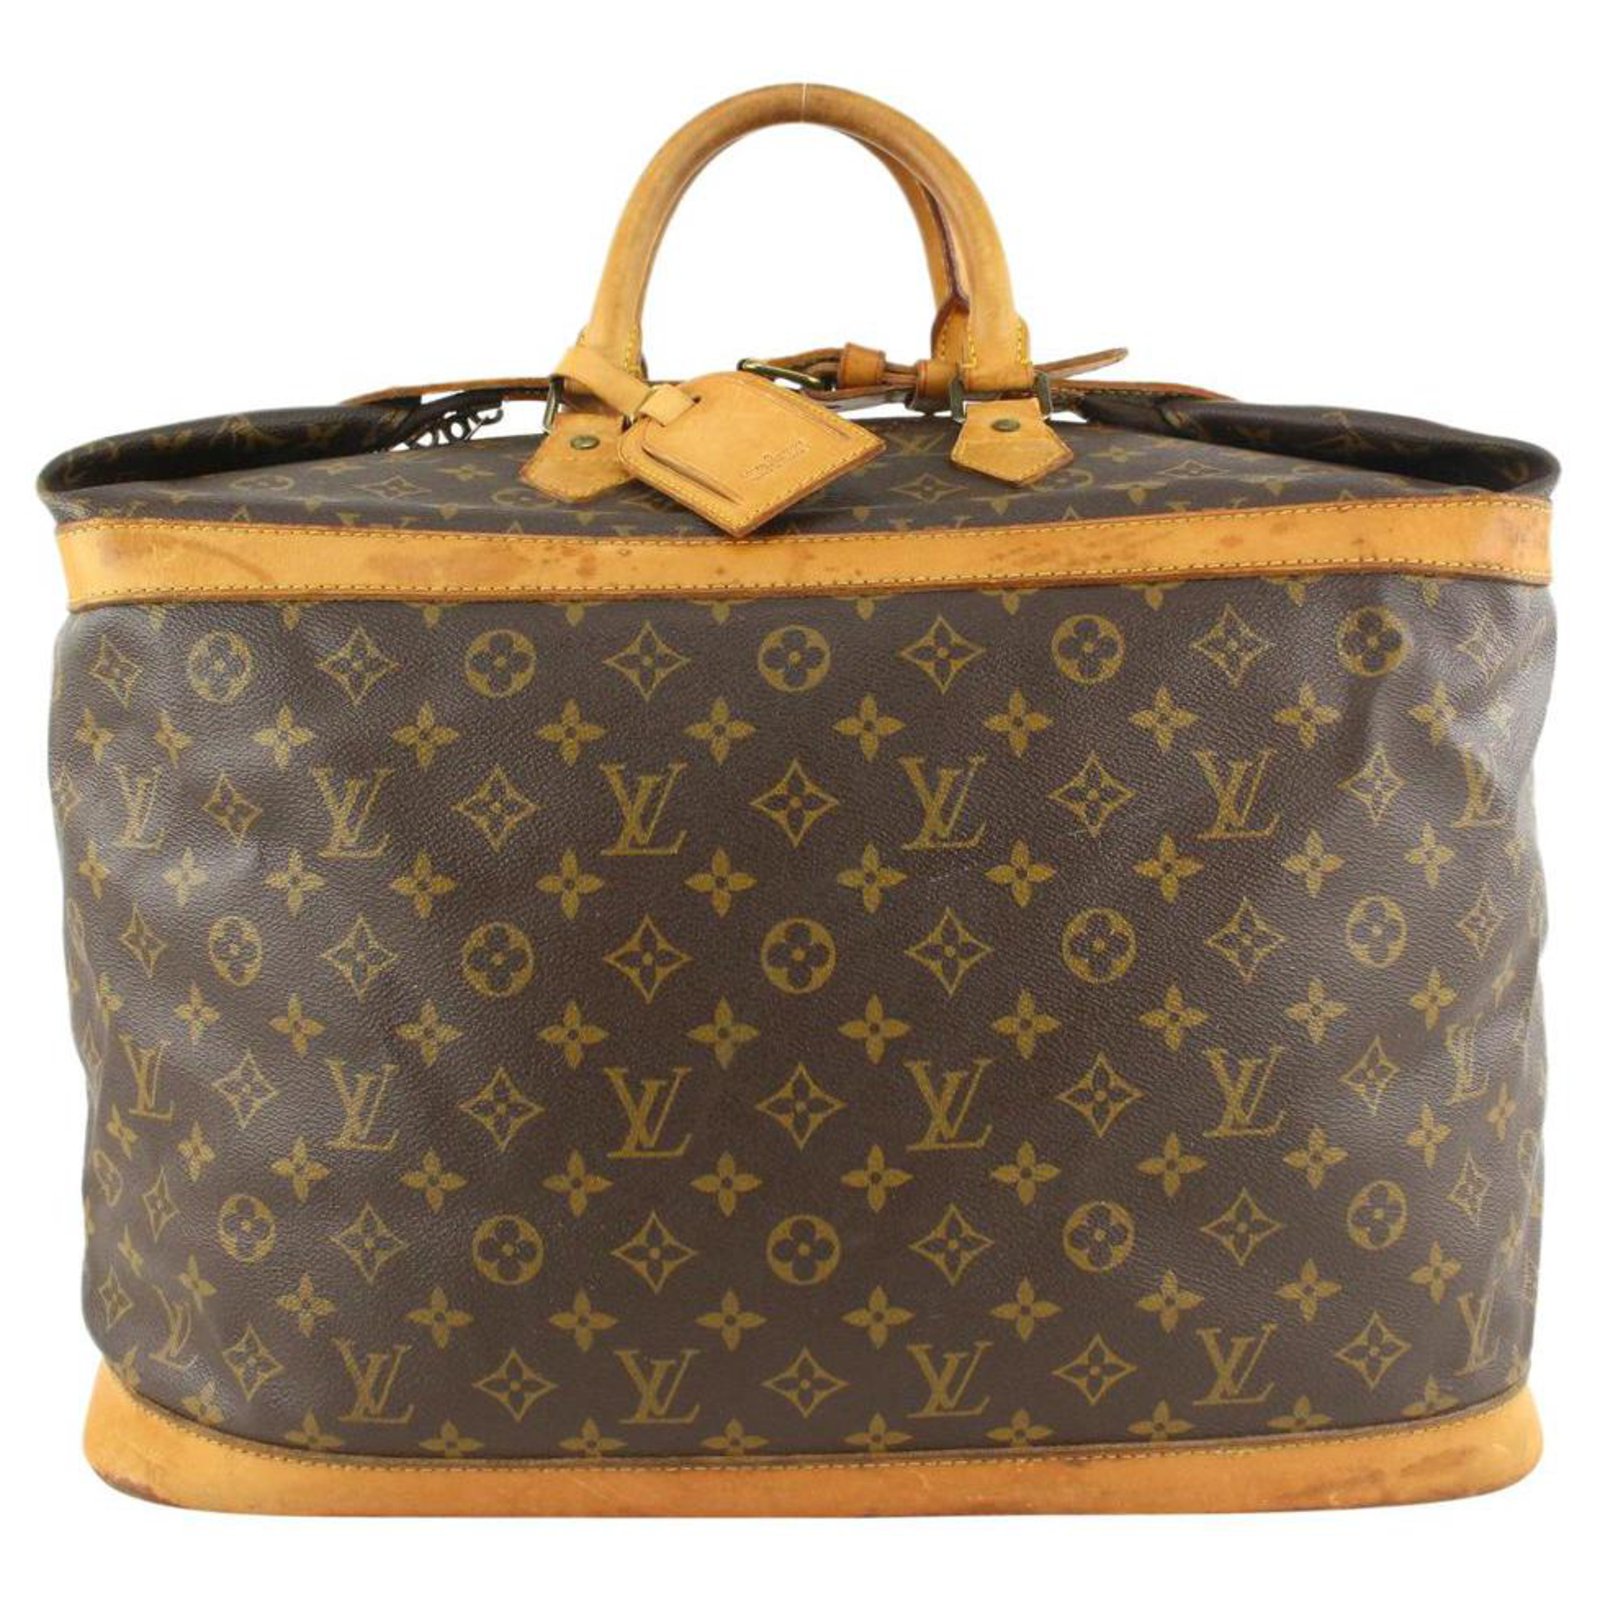 Louis Vuitton Cruiser Monogram Canvas And Leather Weekend Bag.